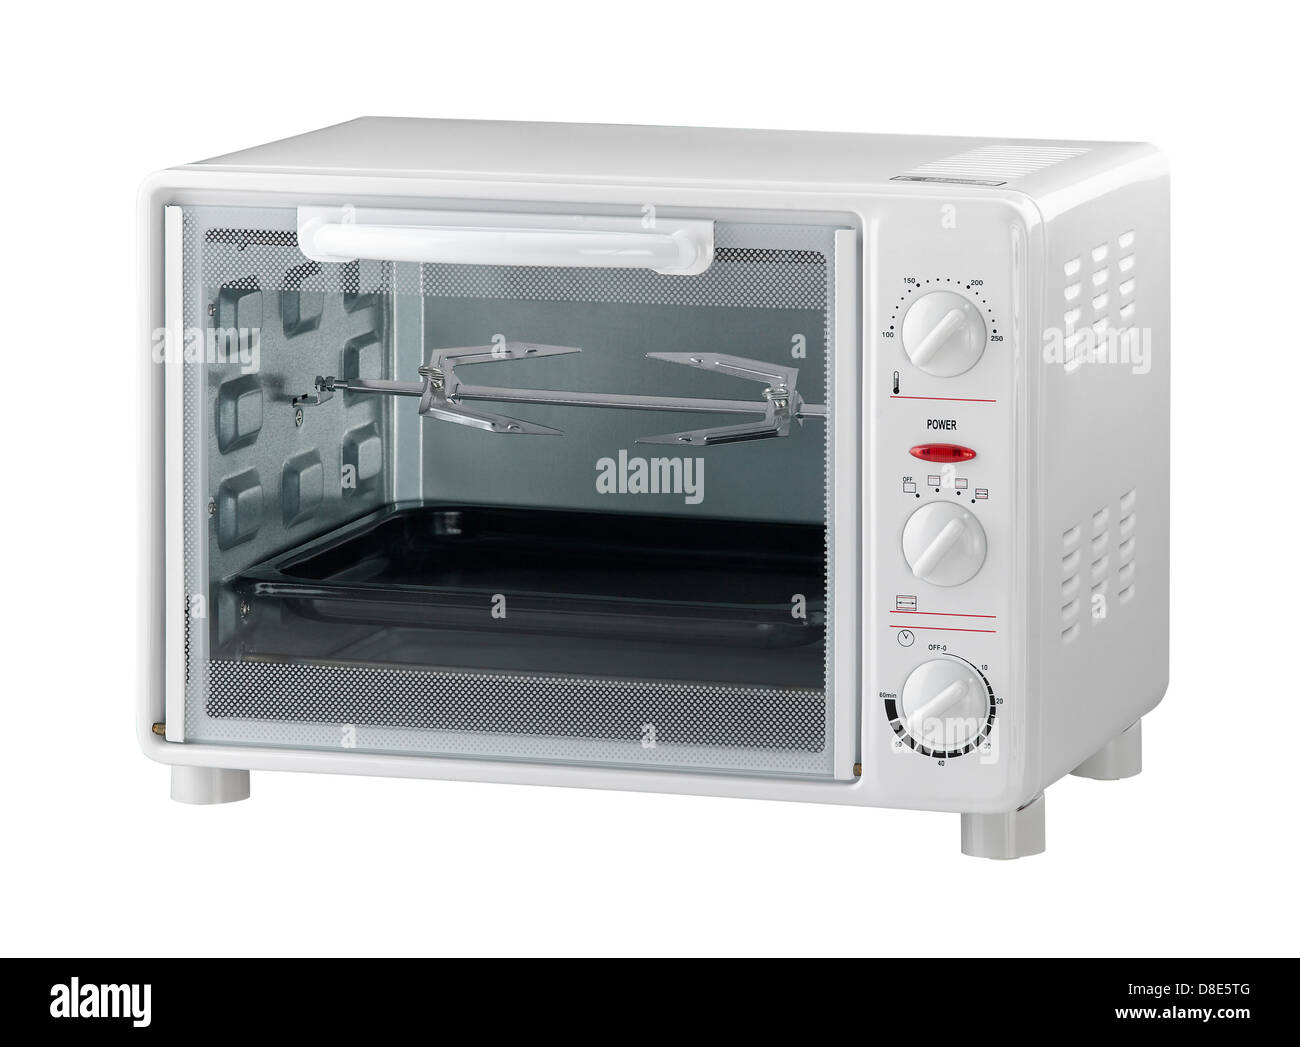 https://c8.alamy.com/comp/D8E5TG/an-electric-oven-the-modern-designed-for-your-kitchen-D8E5TG.jpg